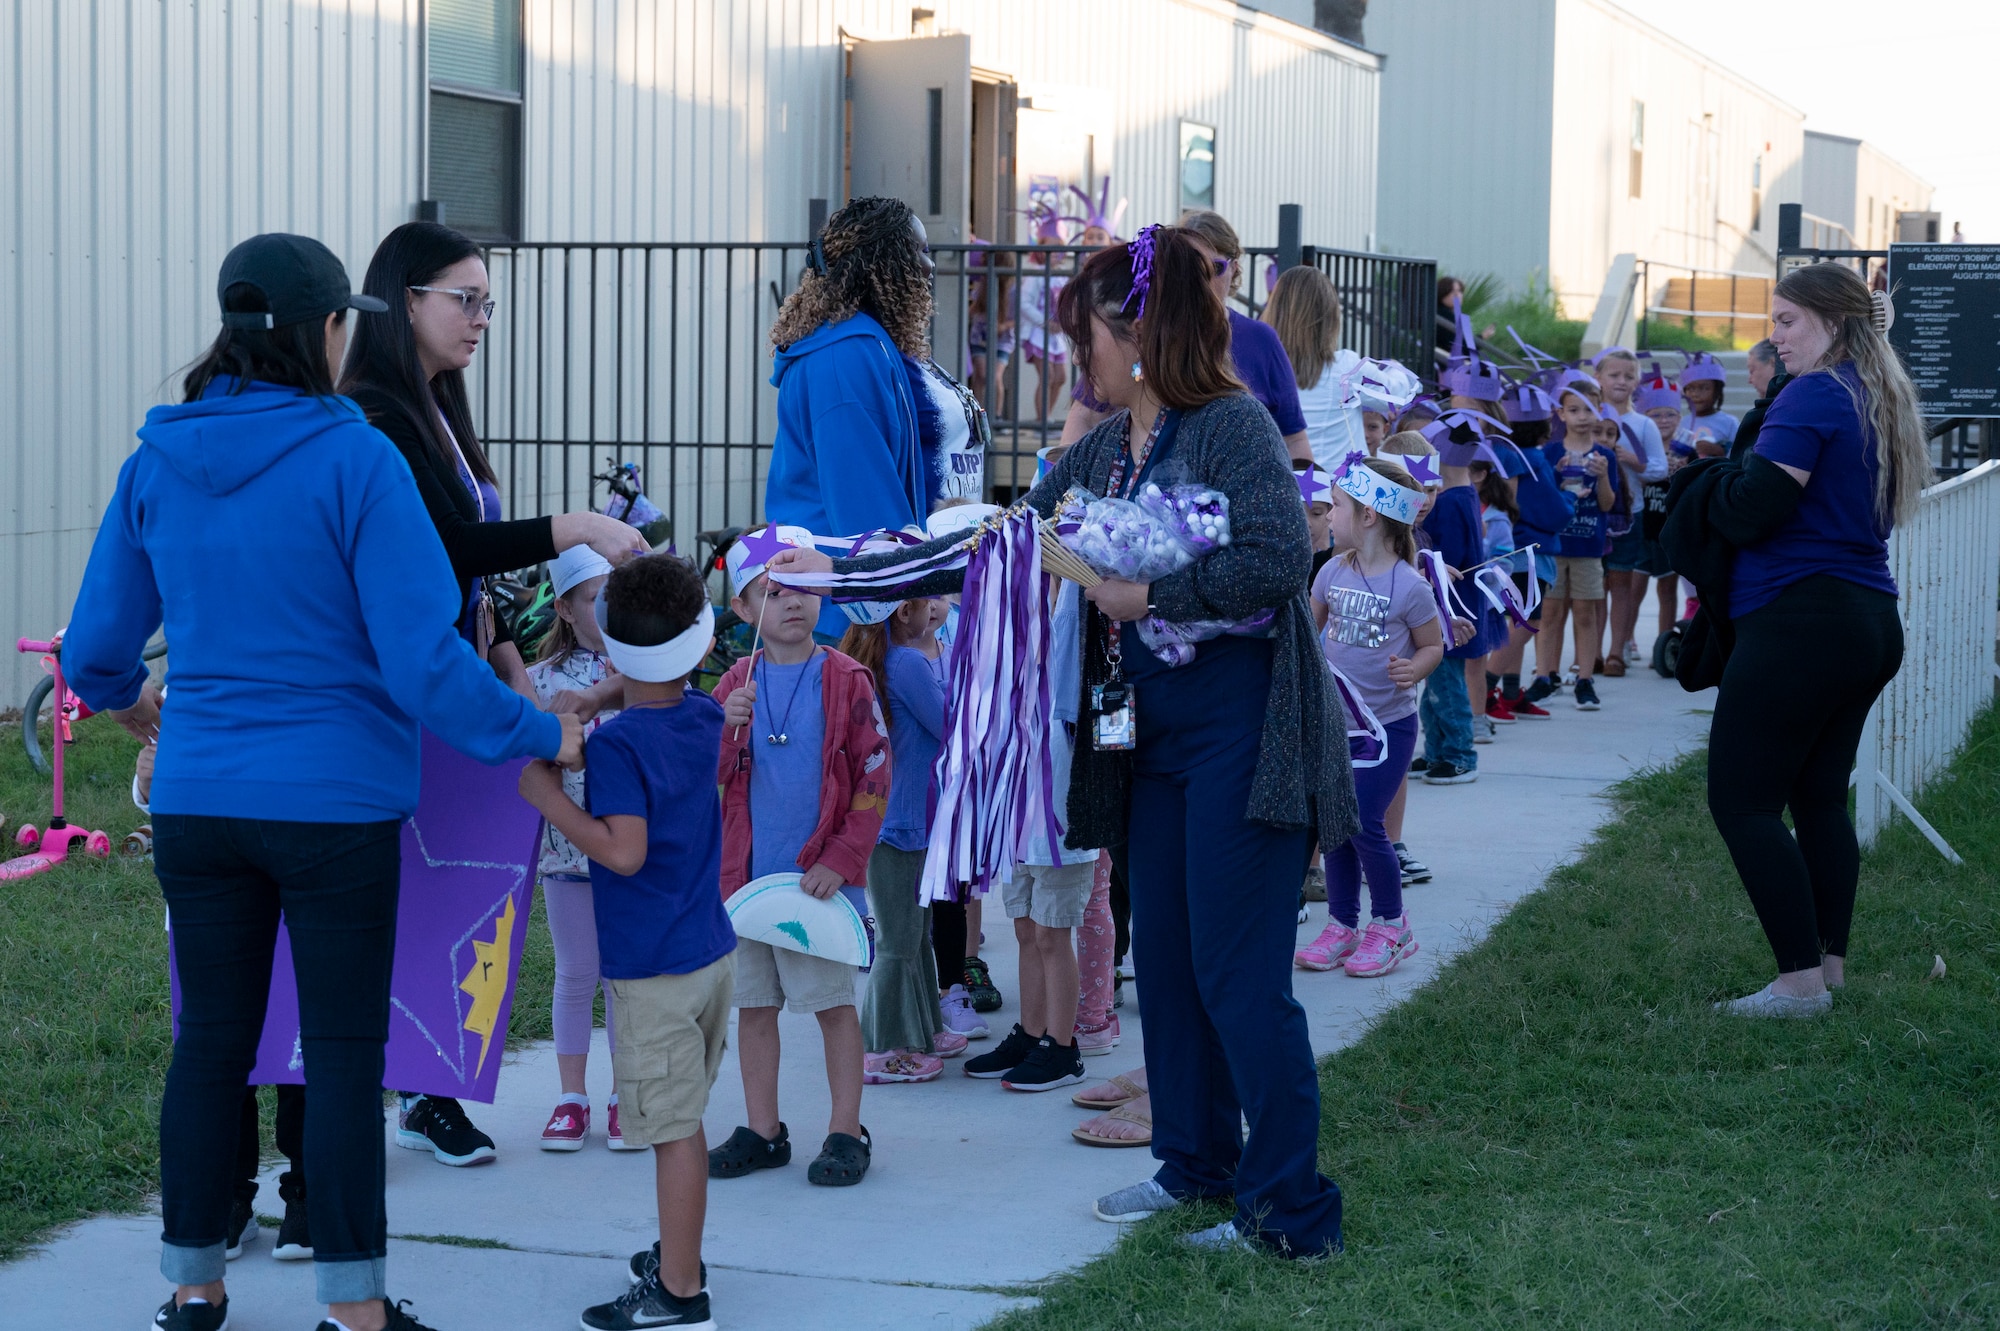 Staﬀ from the Roberto Bobby Barrera (RBB) Elementary School hand out streamers to students as they prepare to walk the “Purple Parade” held at Laughlin Air Force Base, Texas, Sept. 29, 2022. The “Purple Parade” was held in celebration of RBB Elementary School receiving the Purple Star Award, recognizing the support and commitment the school provides to meeting the unique needs of military-connected students and their families. (U.S. Air Force photo by Airman 1st Class Kailee Reynolds)